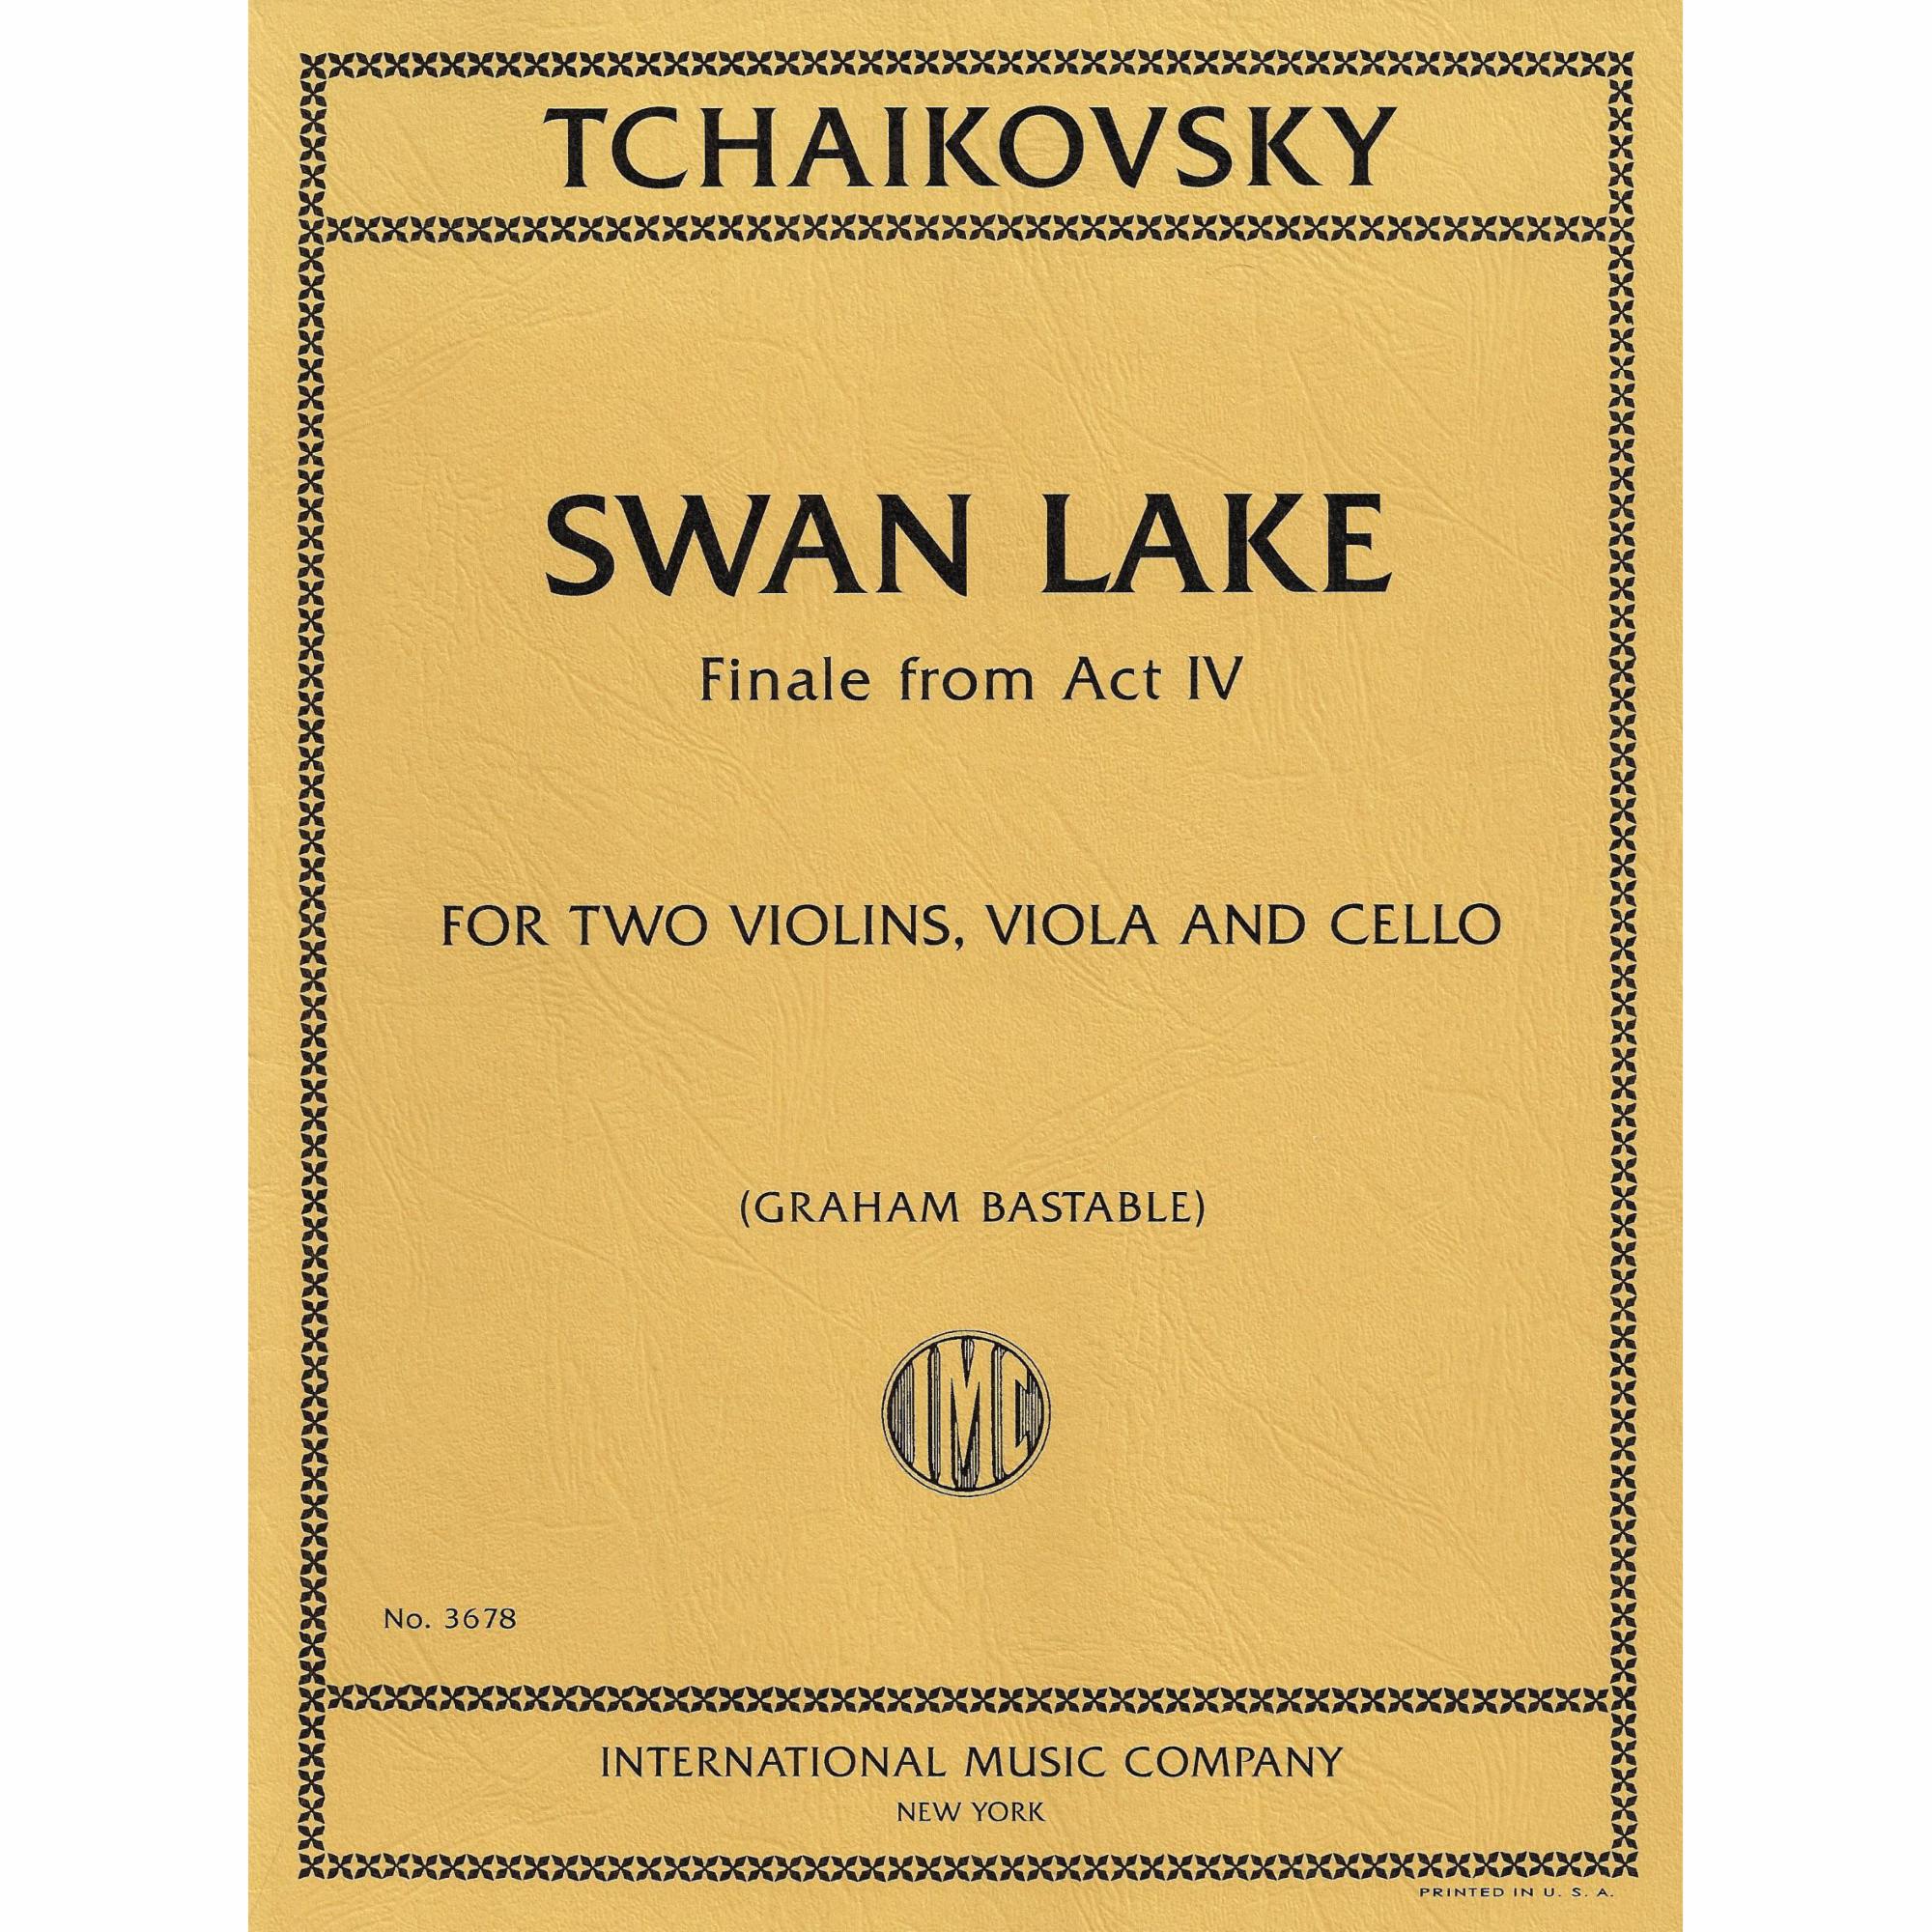 Tchaikovsky -- Finale from Act IV, from Swan Lake for String Quartet